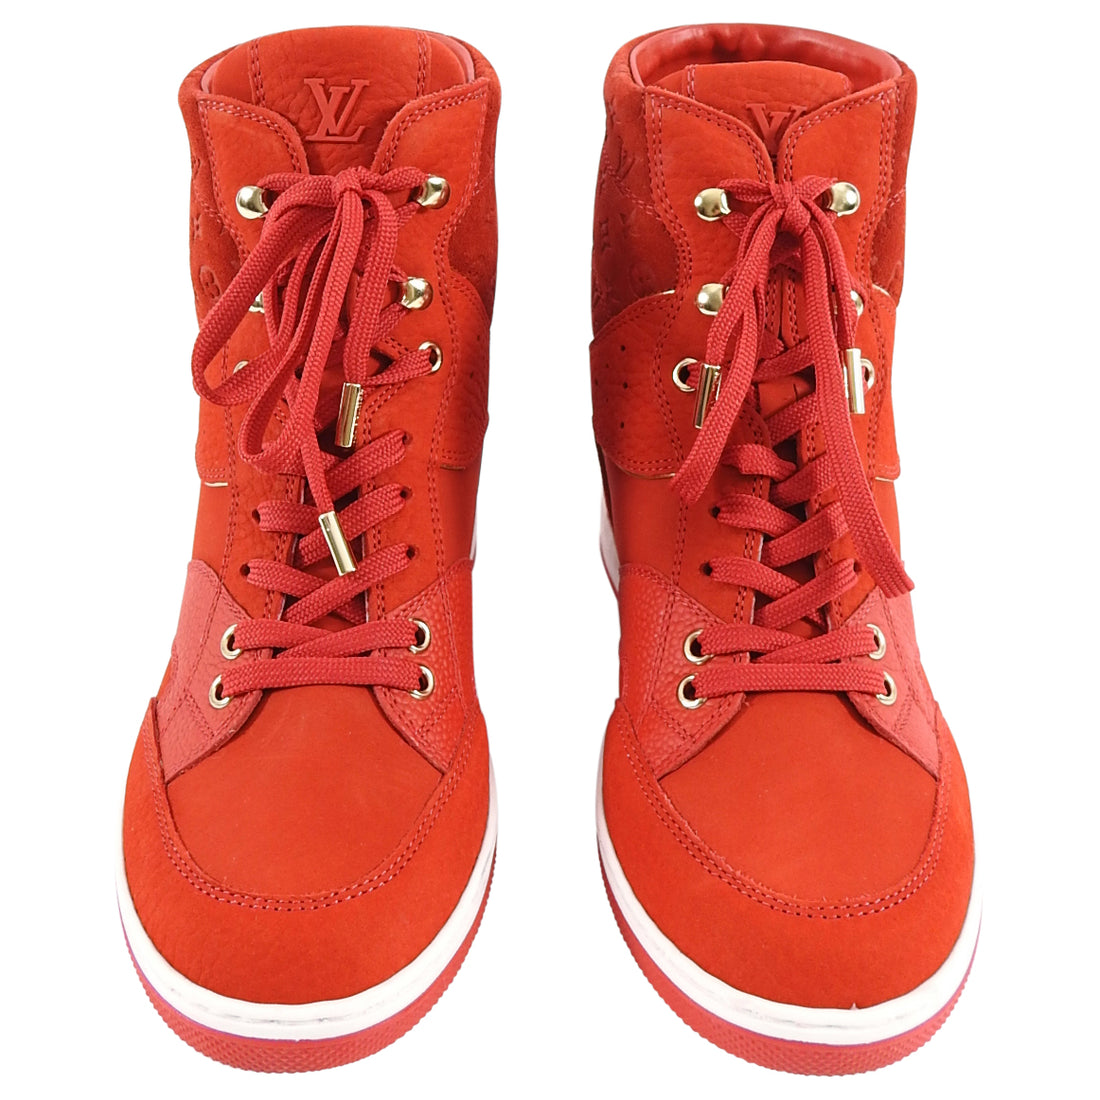 LOUIS VUITTON CLIFF SHOES 35.5 RED LEATHER WEDGE SNEAKERS ref